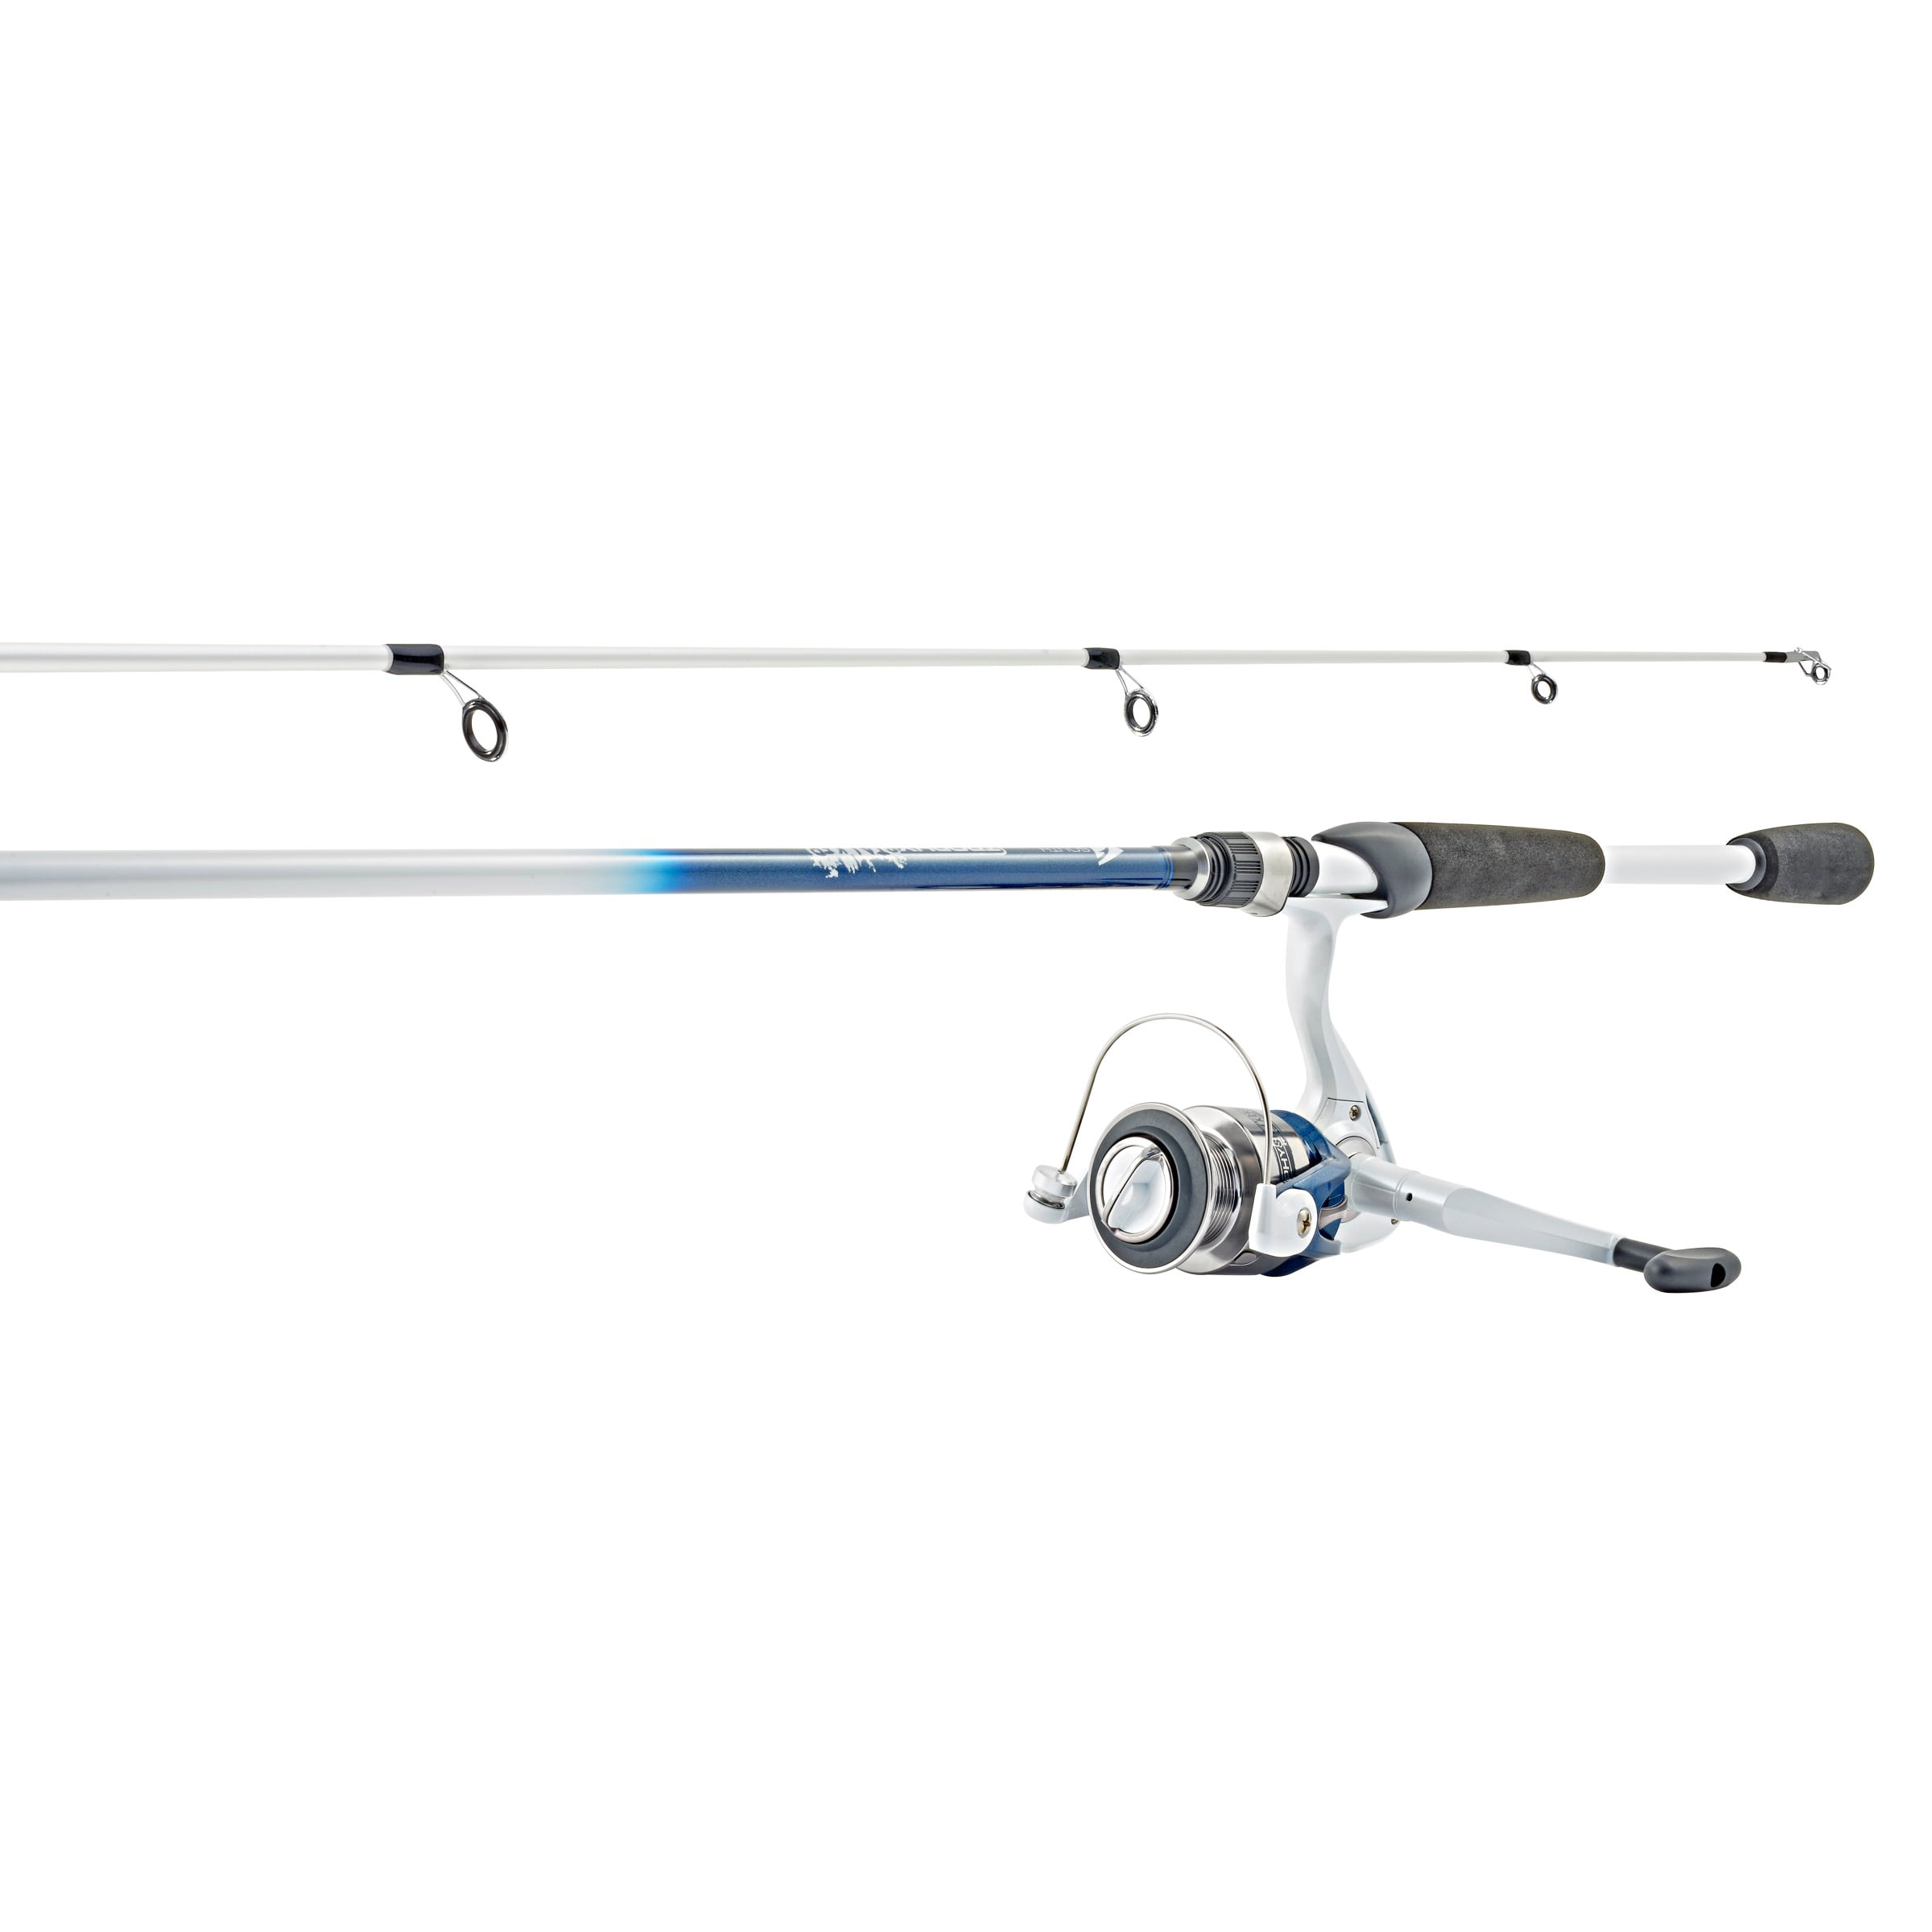 Southbend/ Shakespeare 5 Wt Fly Rod/reel Combo 